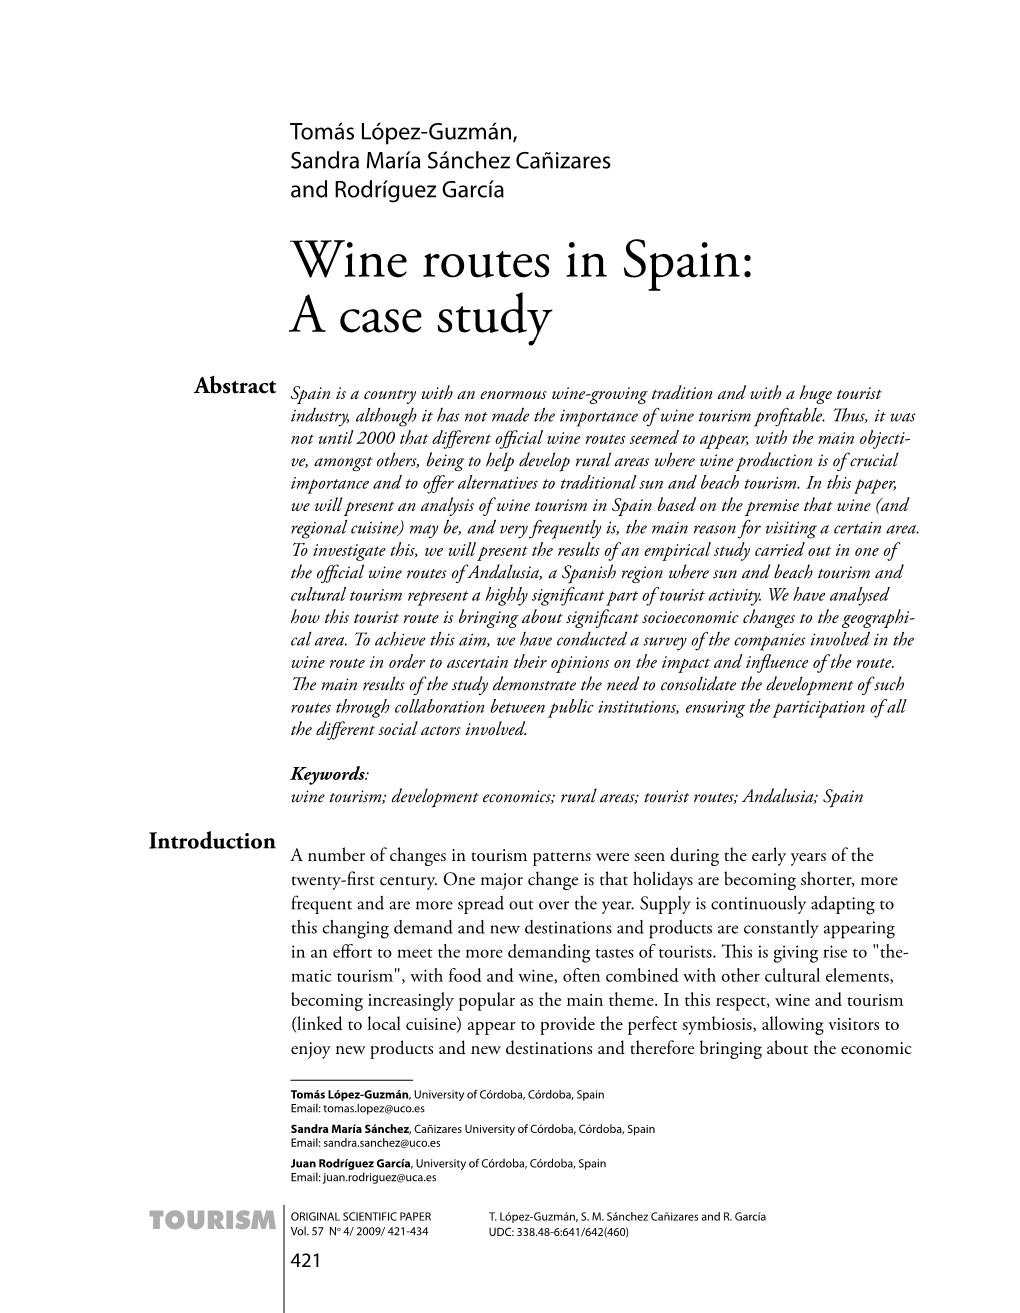 Wine Routes in Spain: a Case Study